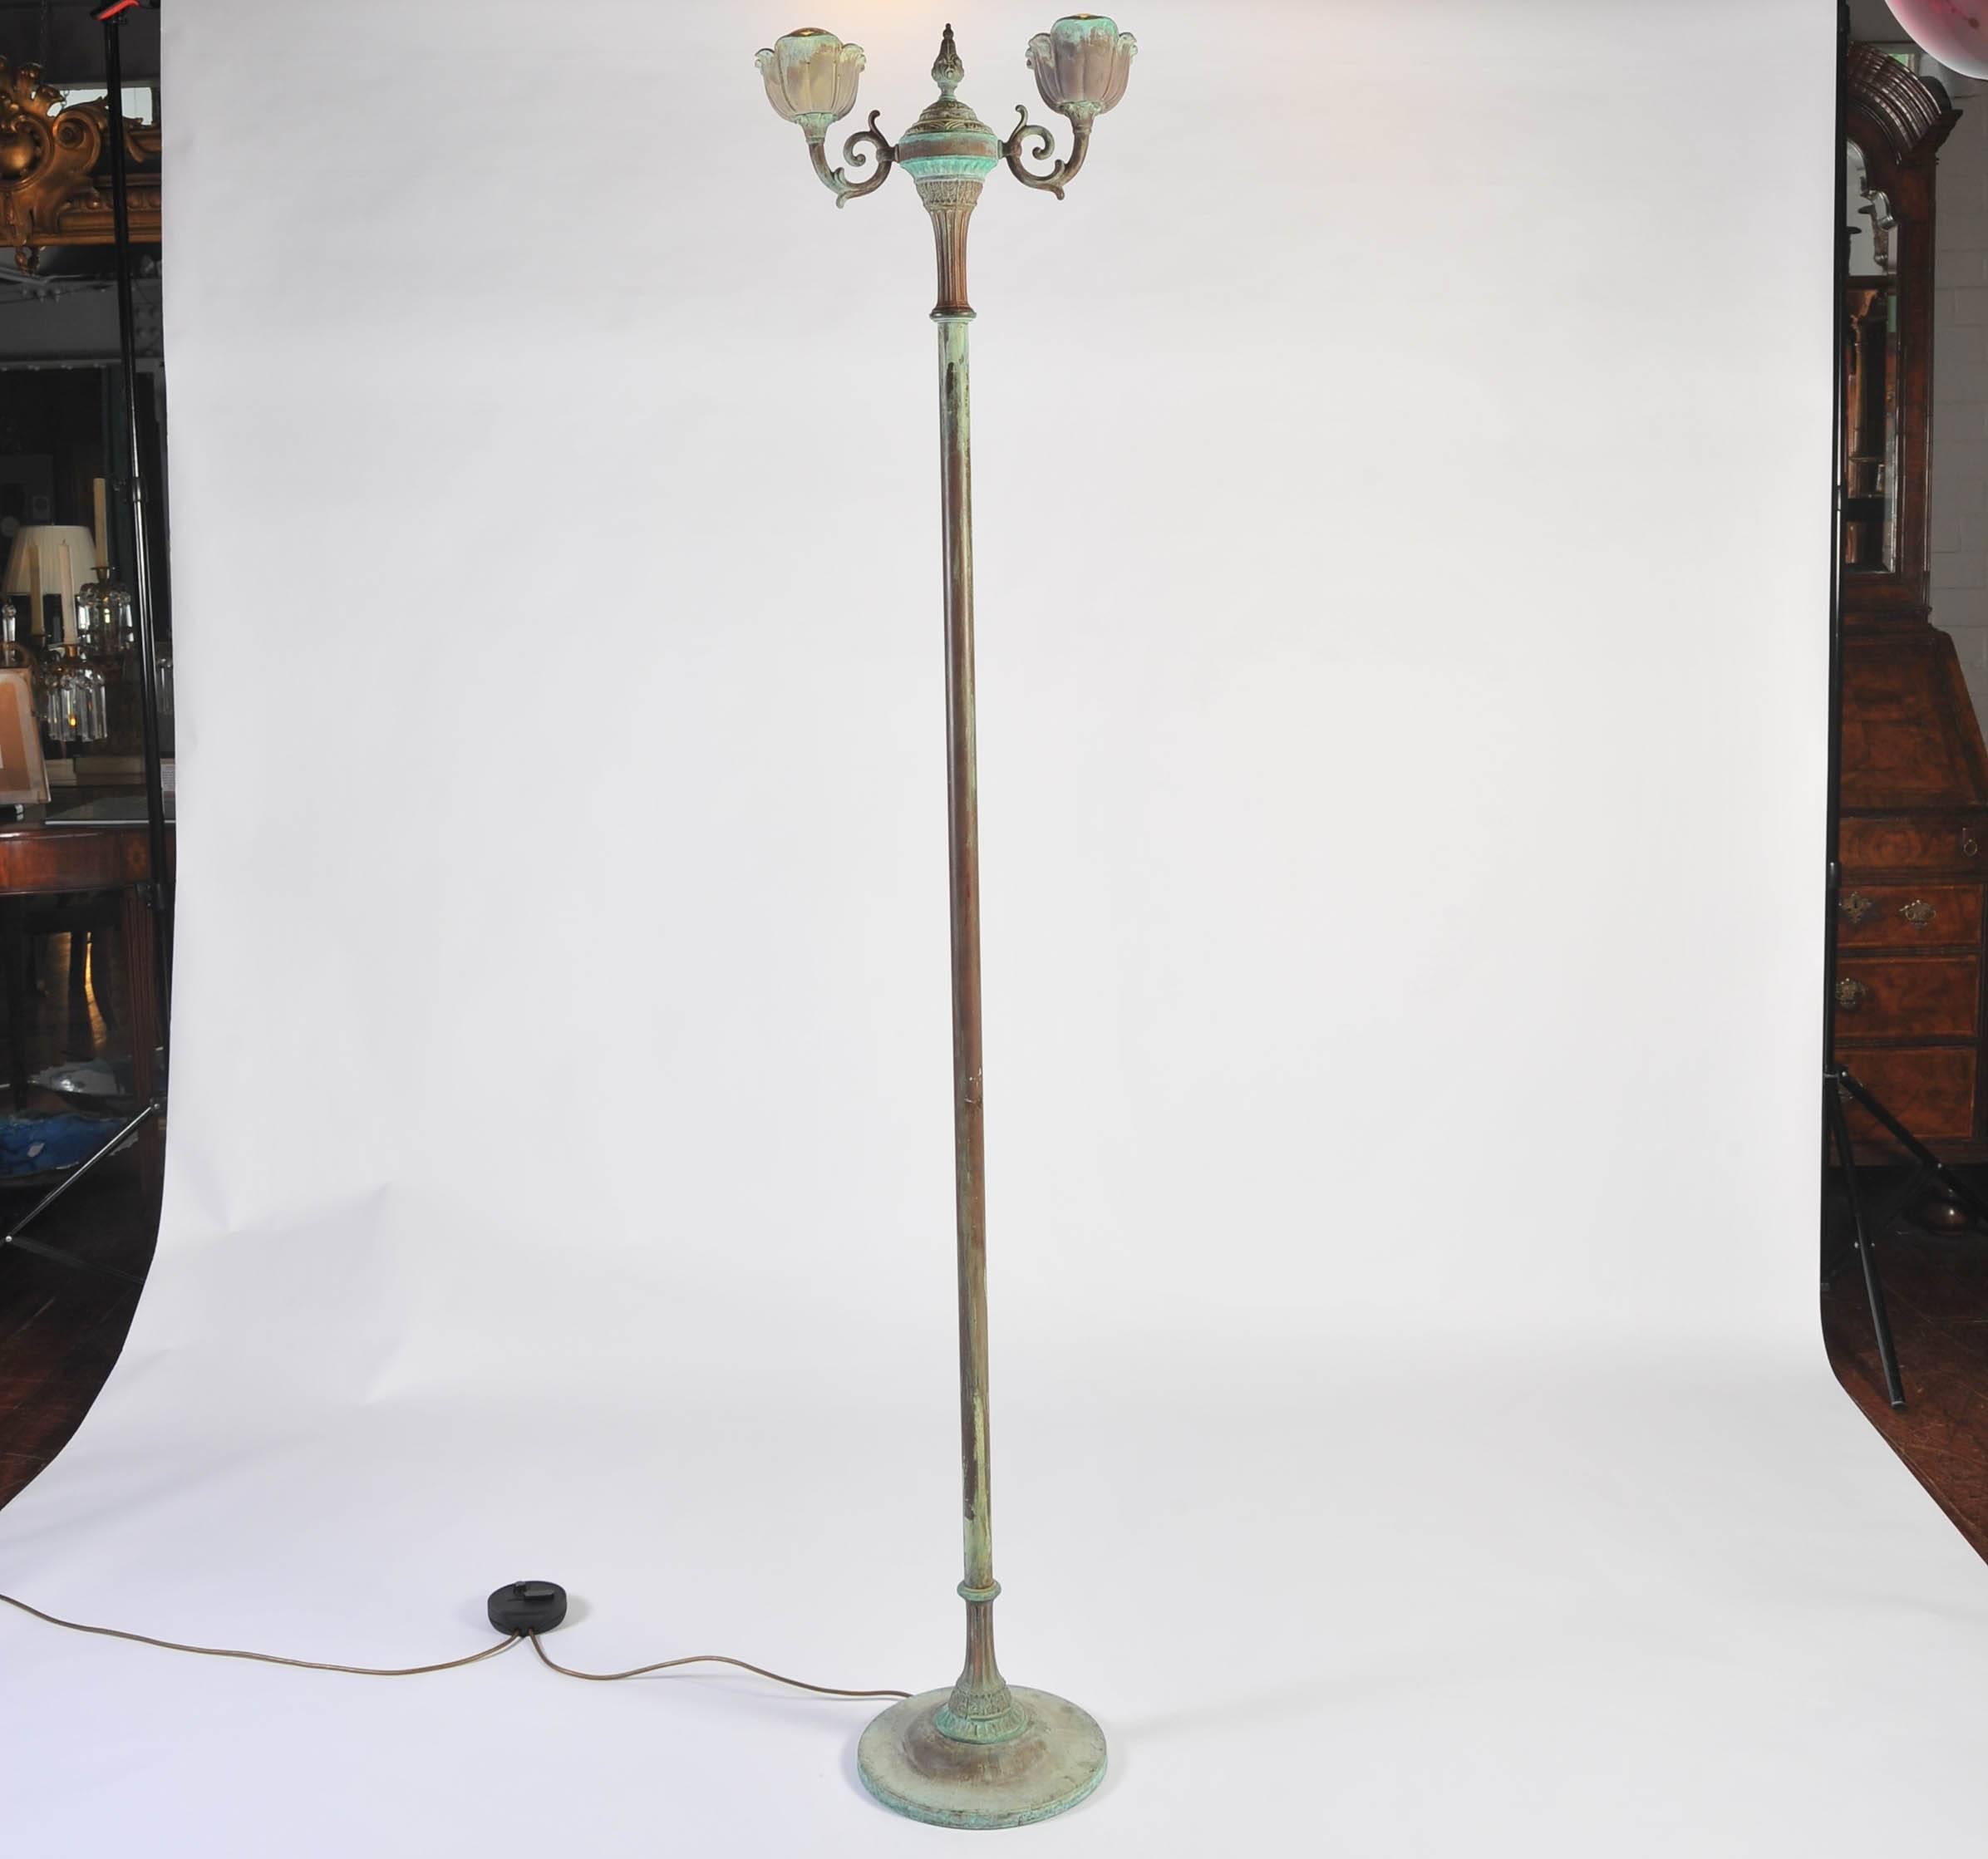 This 20th century standing lamp with a Verdi Gris paint effect with two-light branches supported by a plain column with classical style base and top.
Re-wired with led bulbs and dimmer switch.